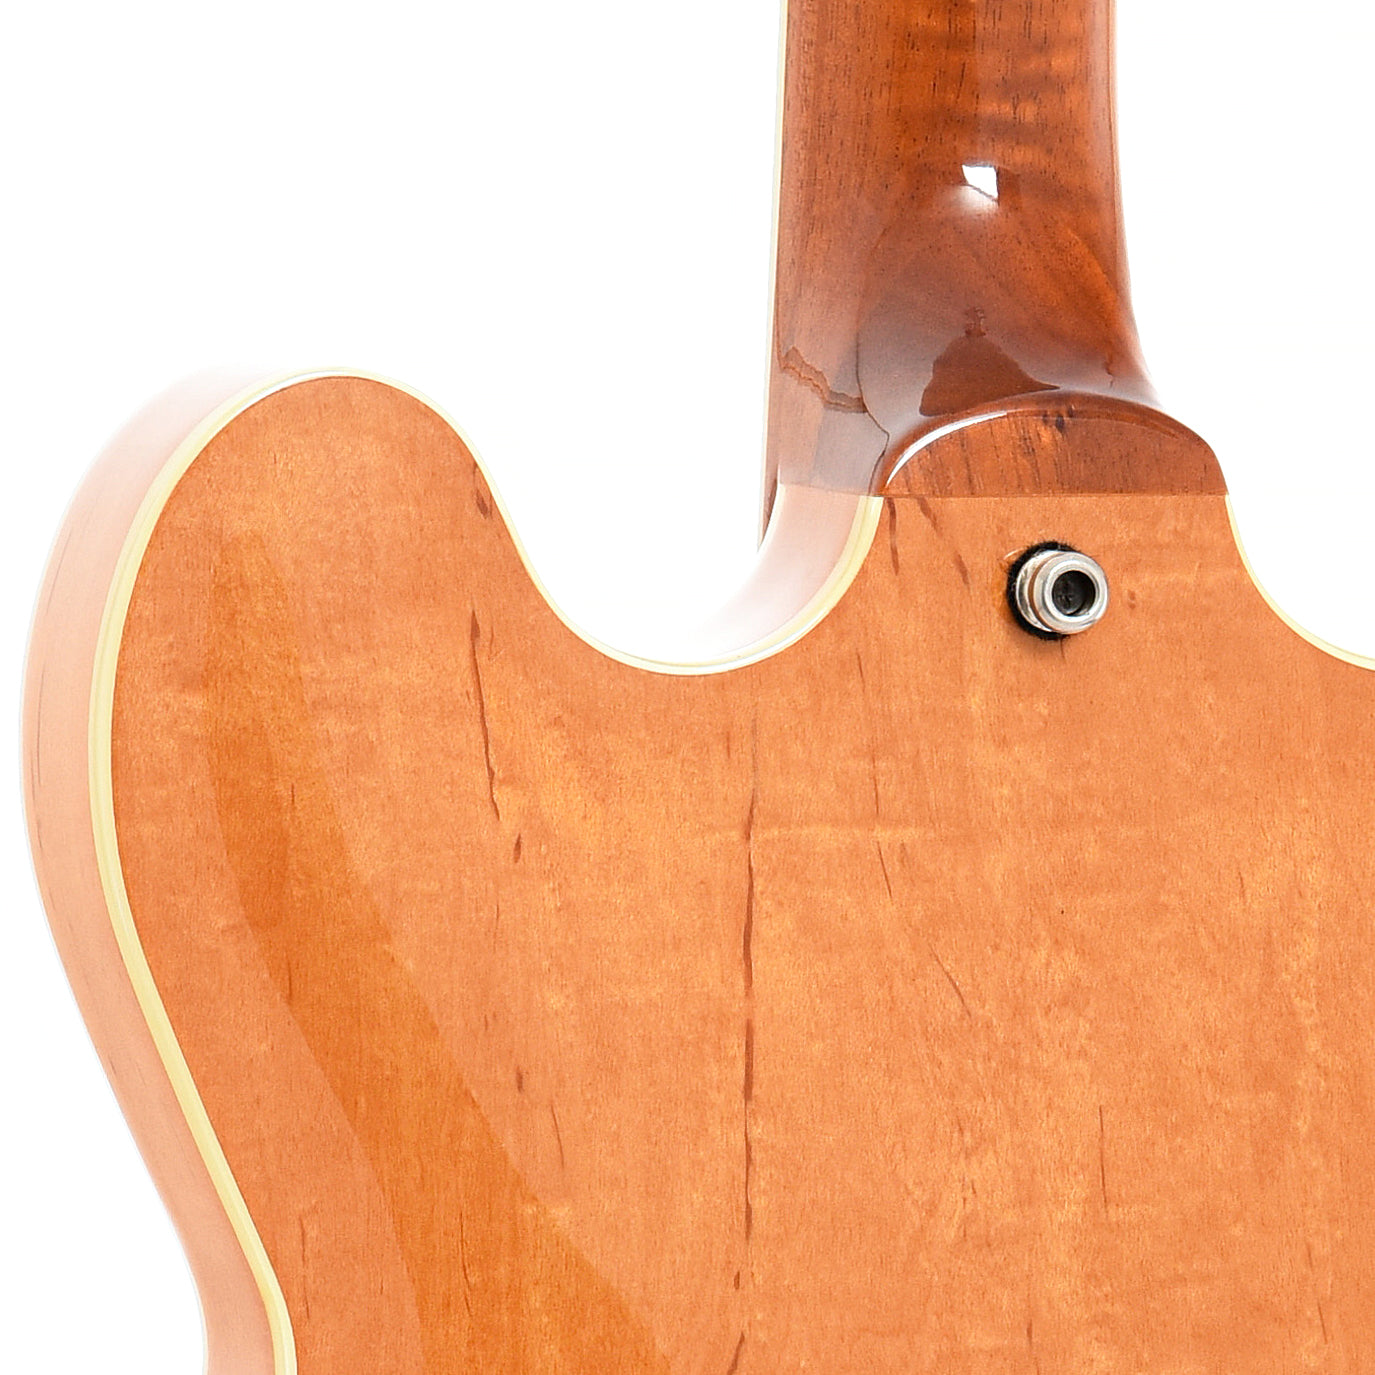 Neck joint of Epiphone Casino Natural Hollowbody Guitar (1995)